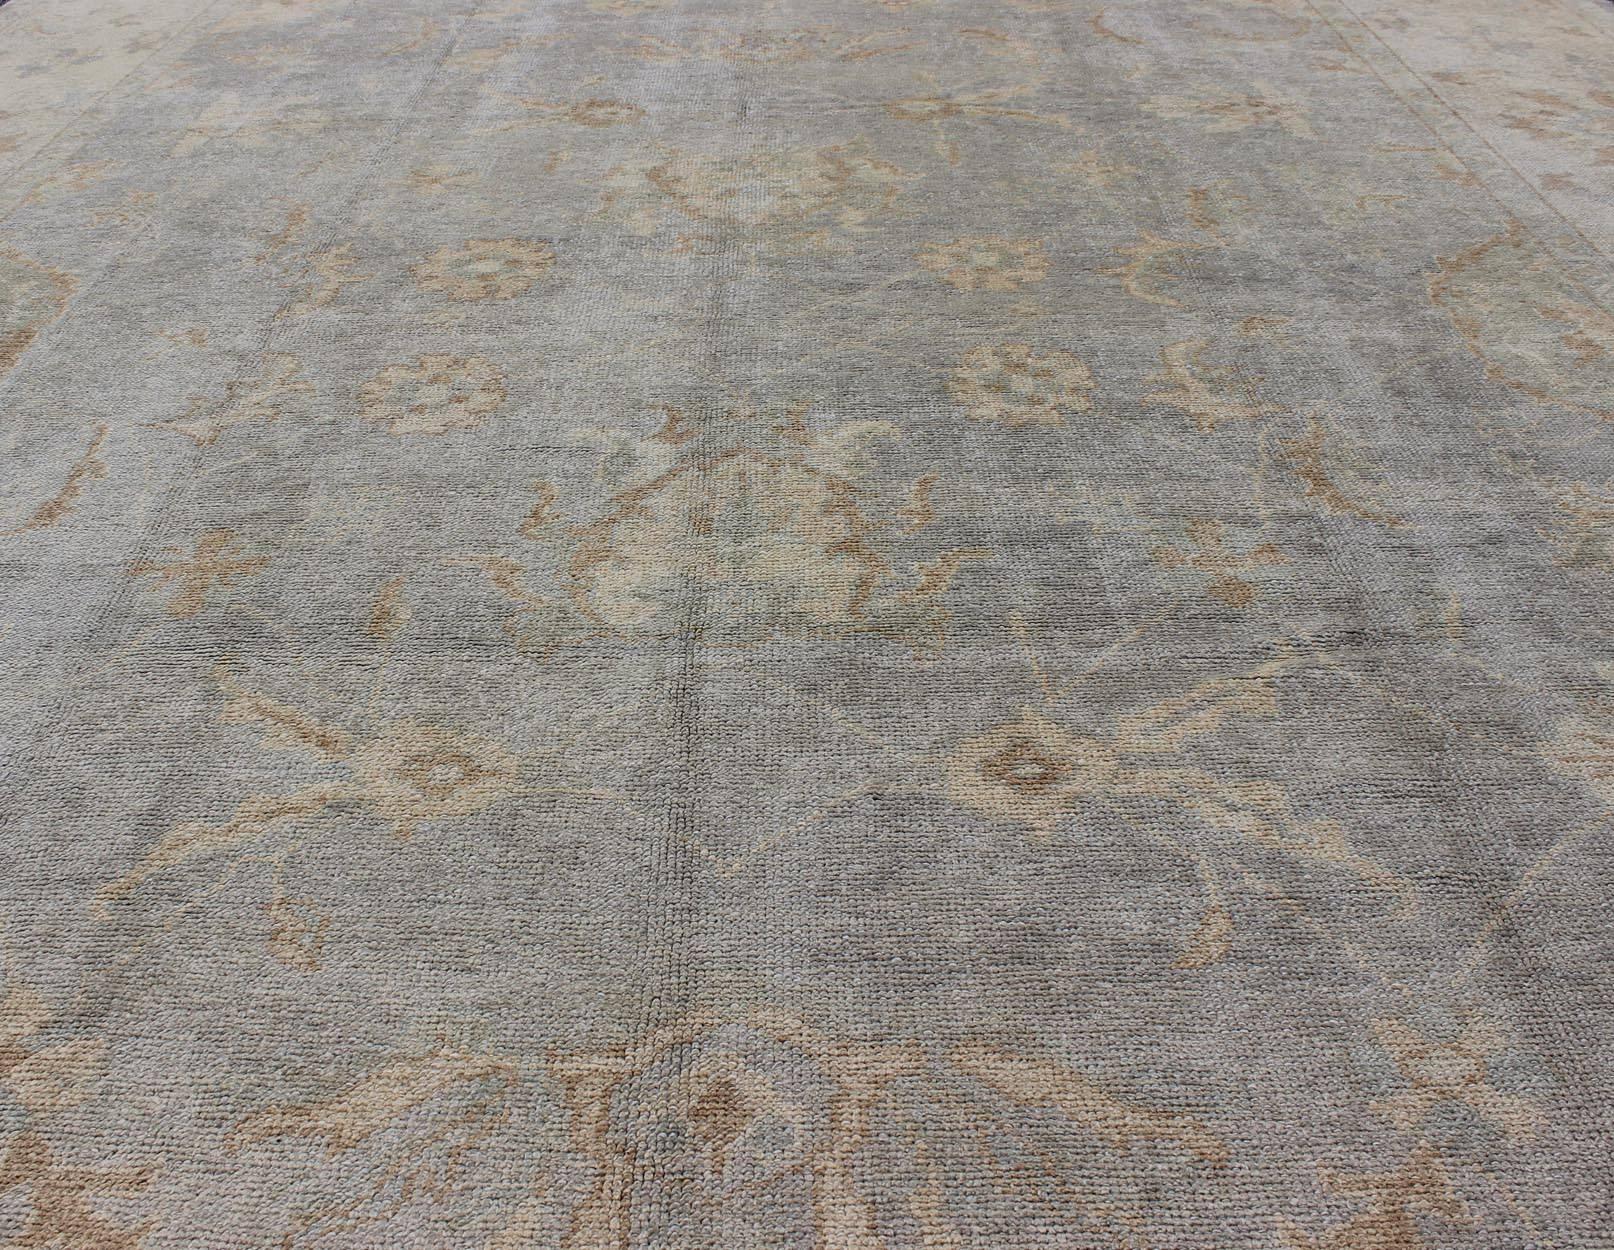 Hand-Knotted Faded Turkish Oushak Rug with All-Over Vining Floral Design in Grey and Cream